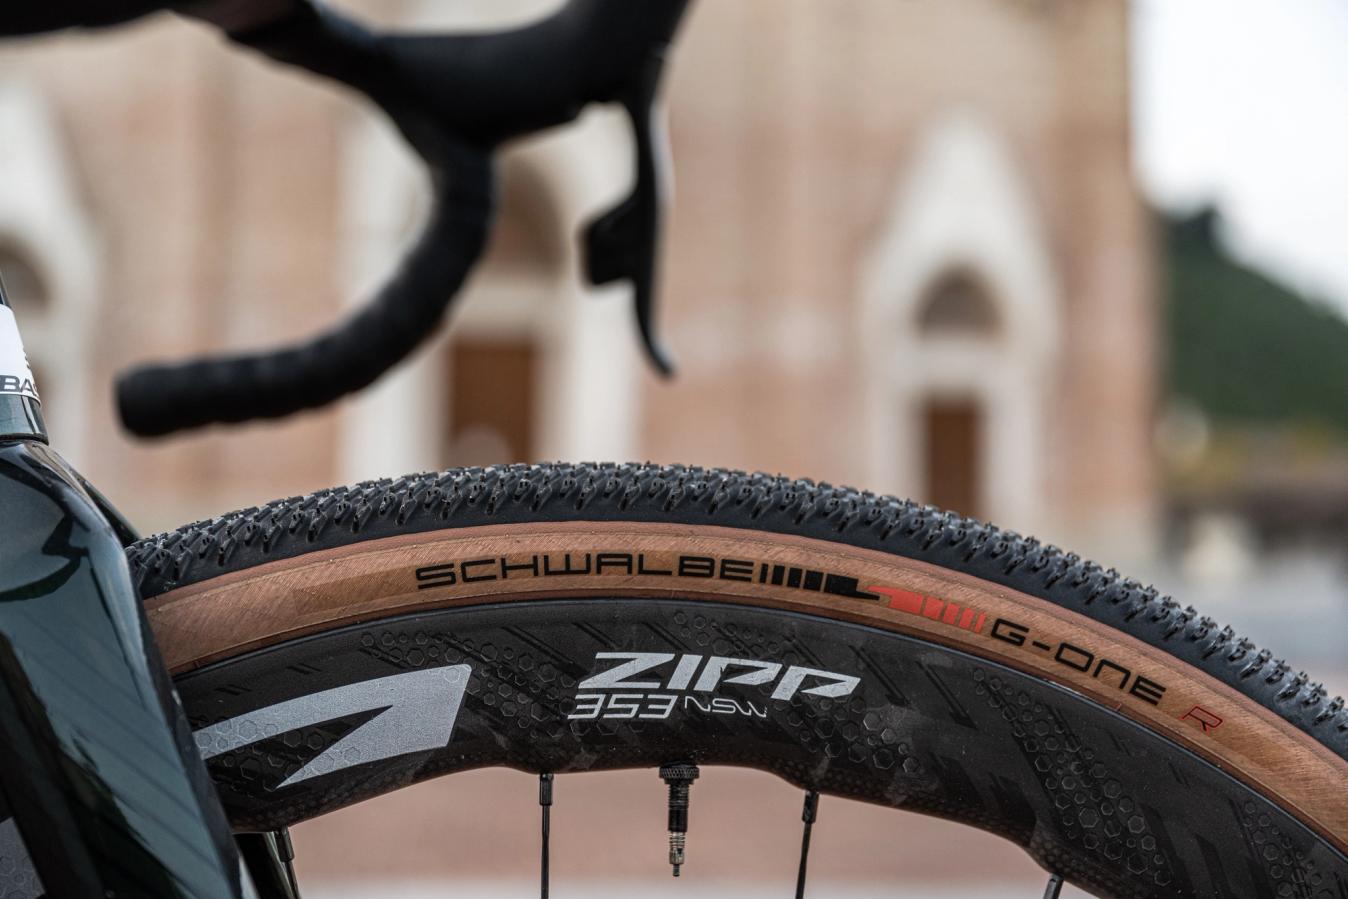 The undulating rim profile is designed to improve aerodynamics and stability